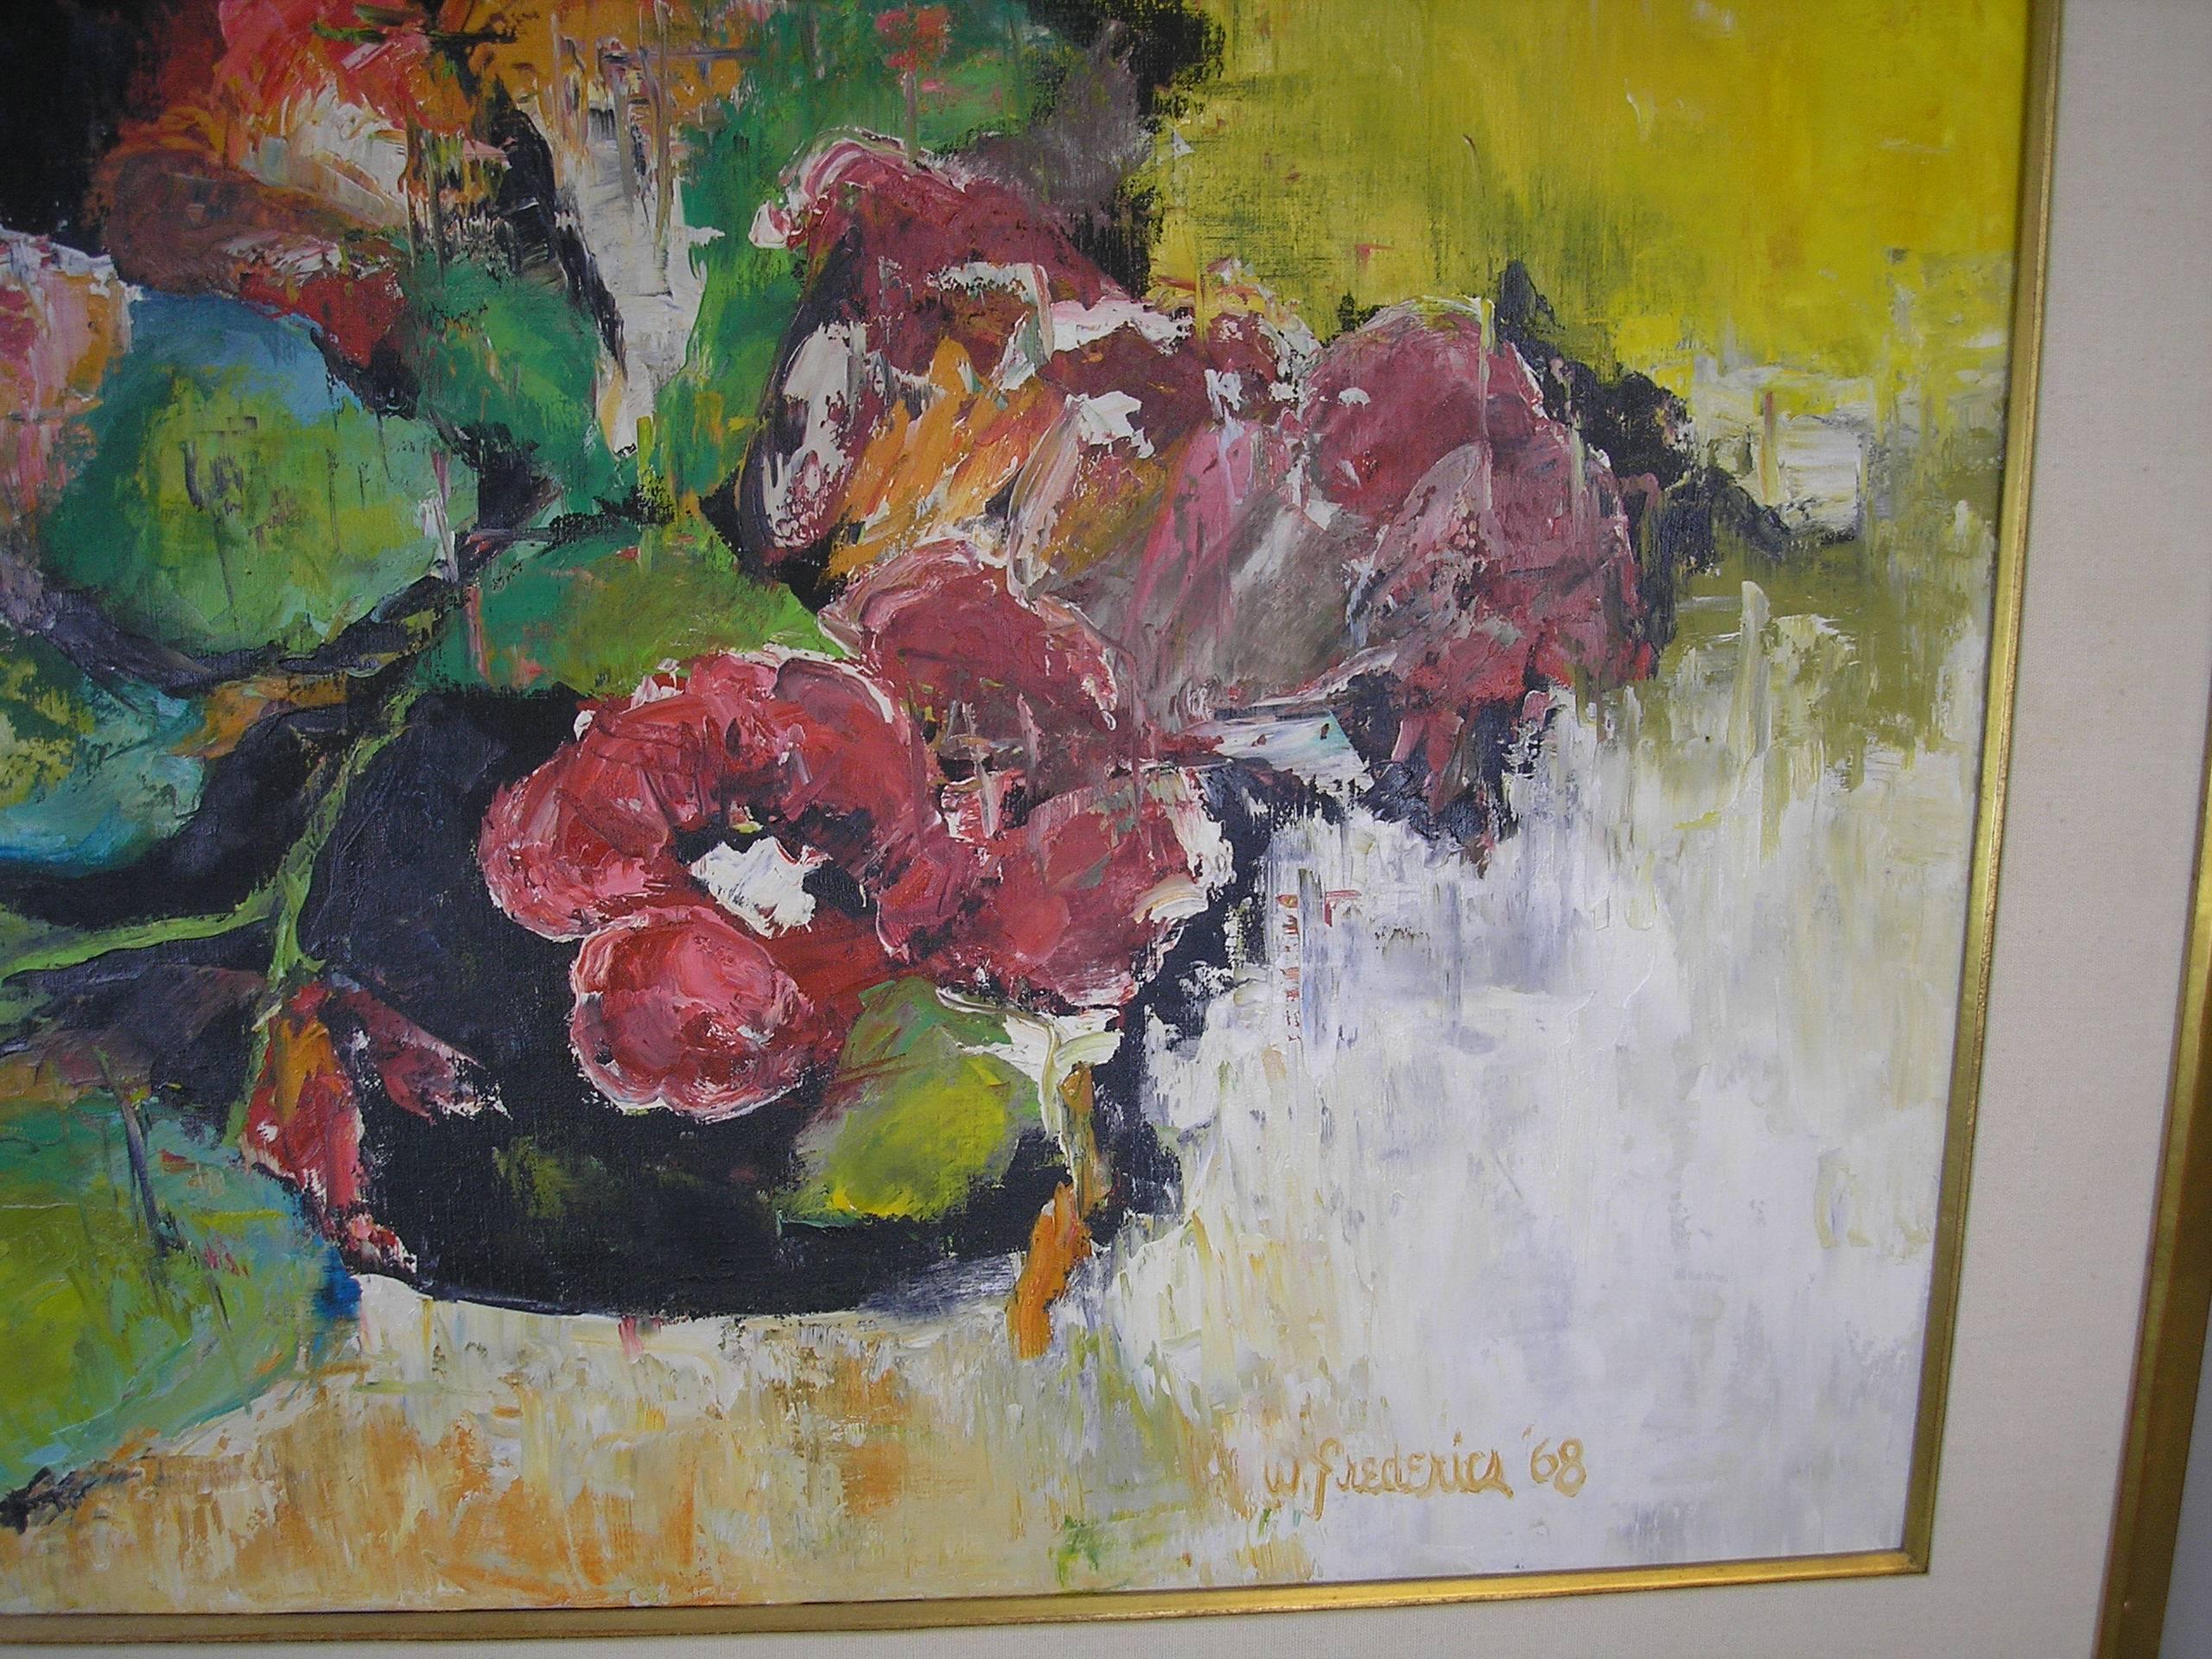 American Original Acrylic Painting by W. Frederika, 1968 For Sale